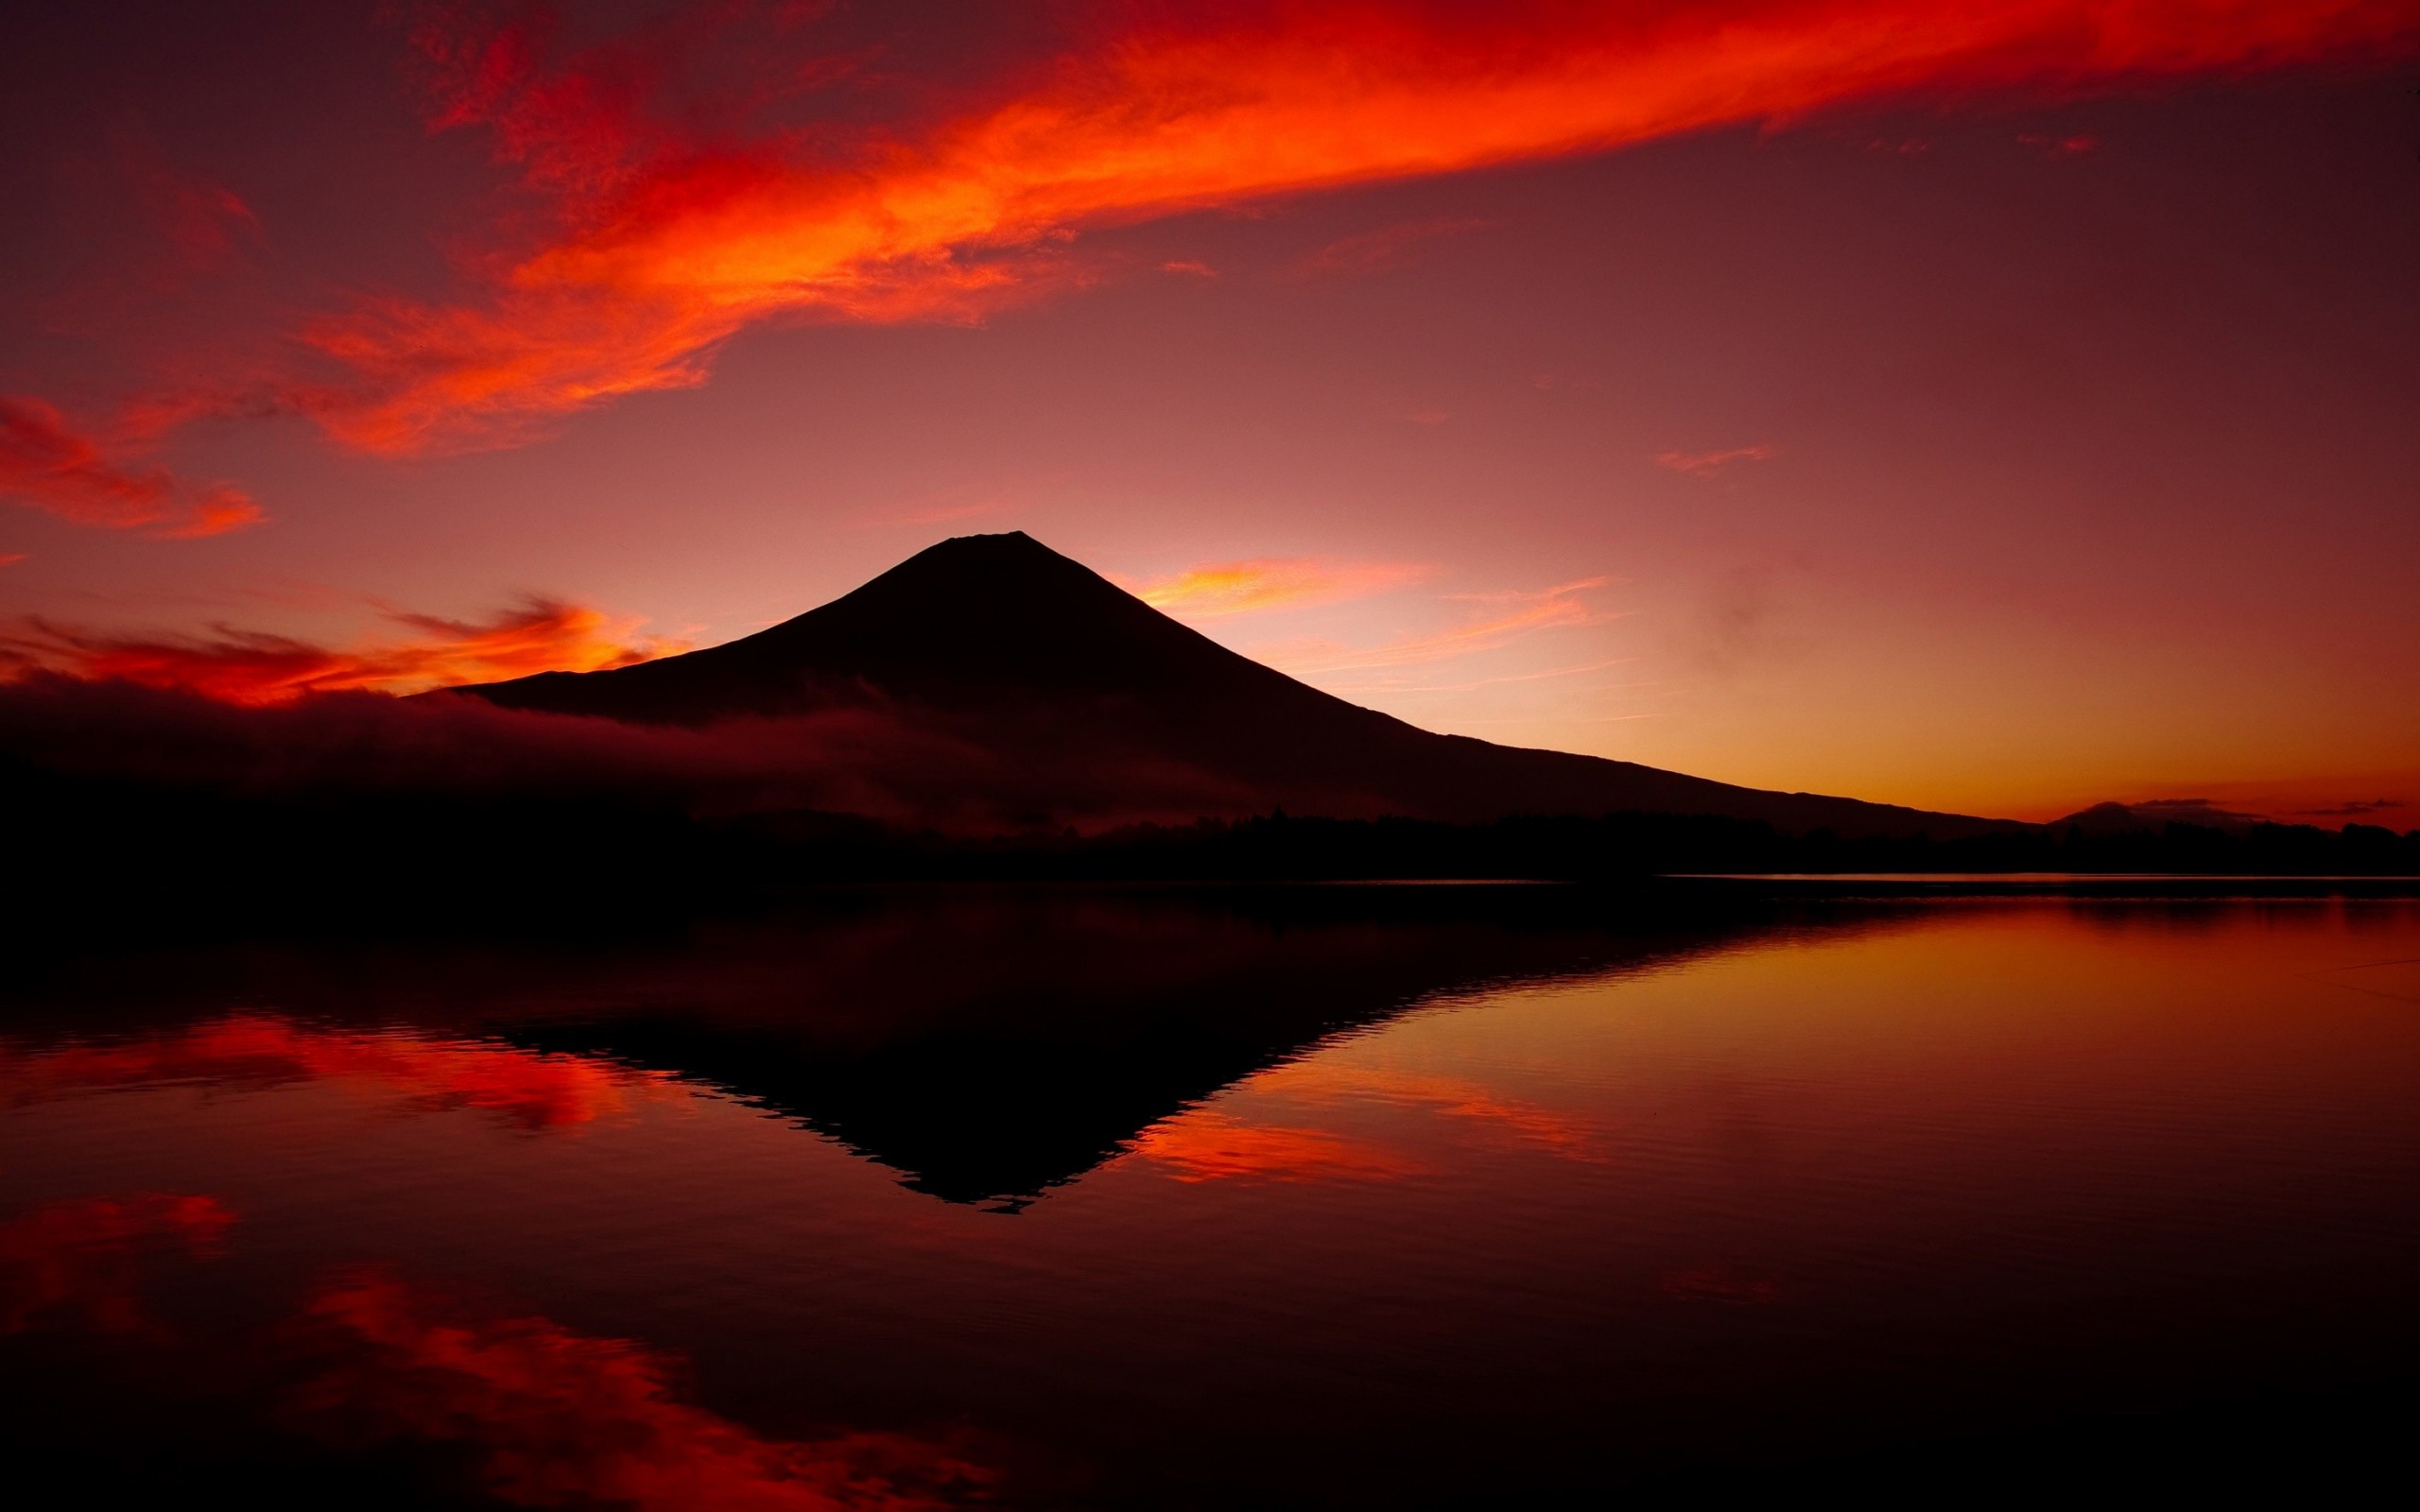 General 2560x1600 Mount Fuji volcano Japan mountains lake reflection landscape photography clouds sky red Asia nature dark